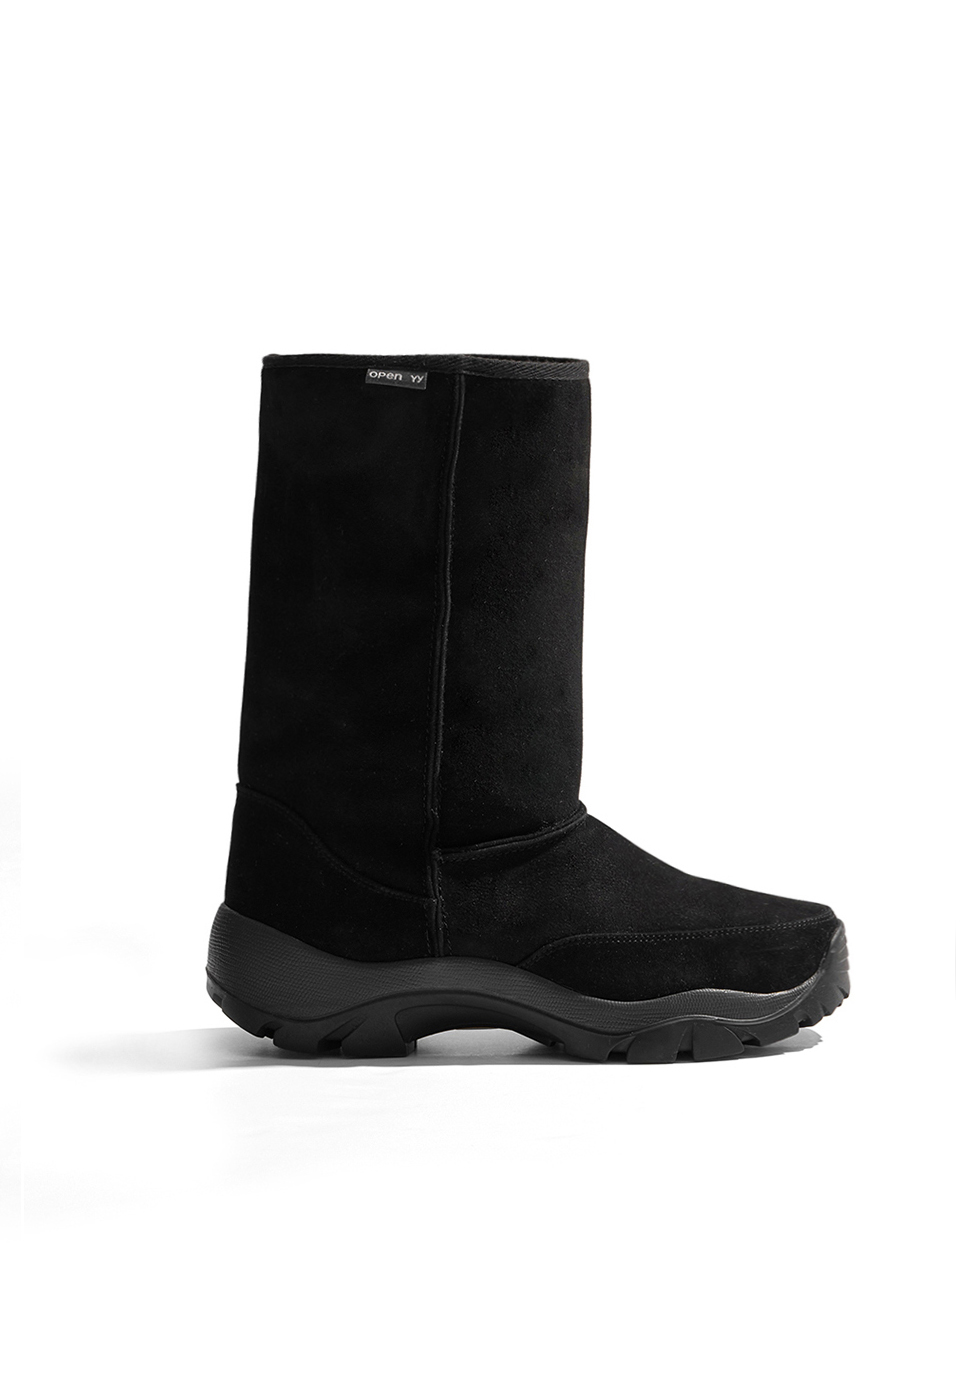 SUEDE MOUNTAIN BOOTS, BLACK